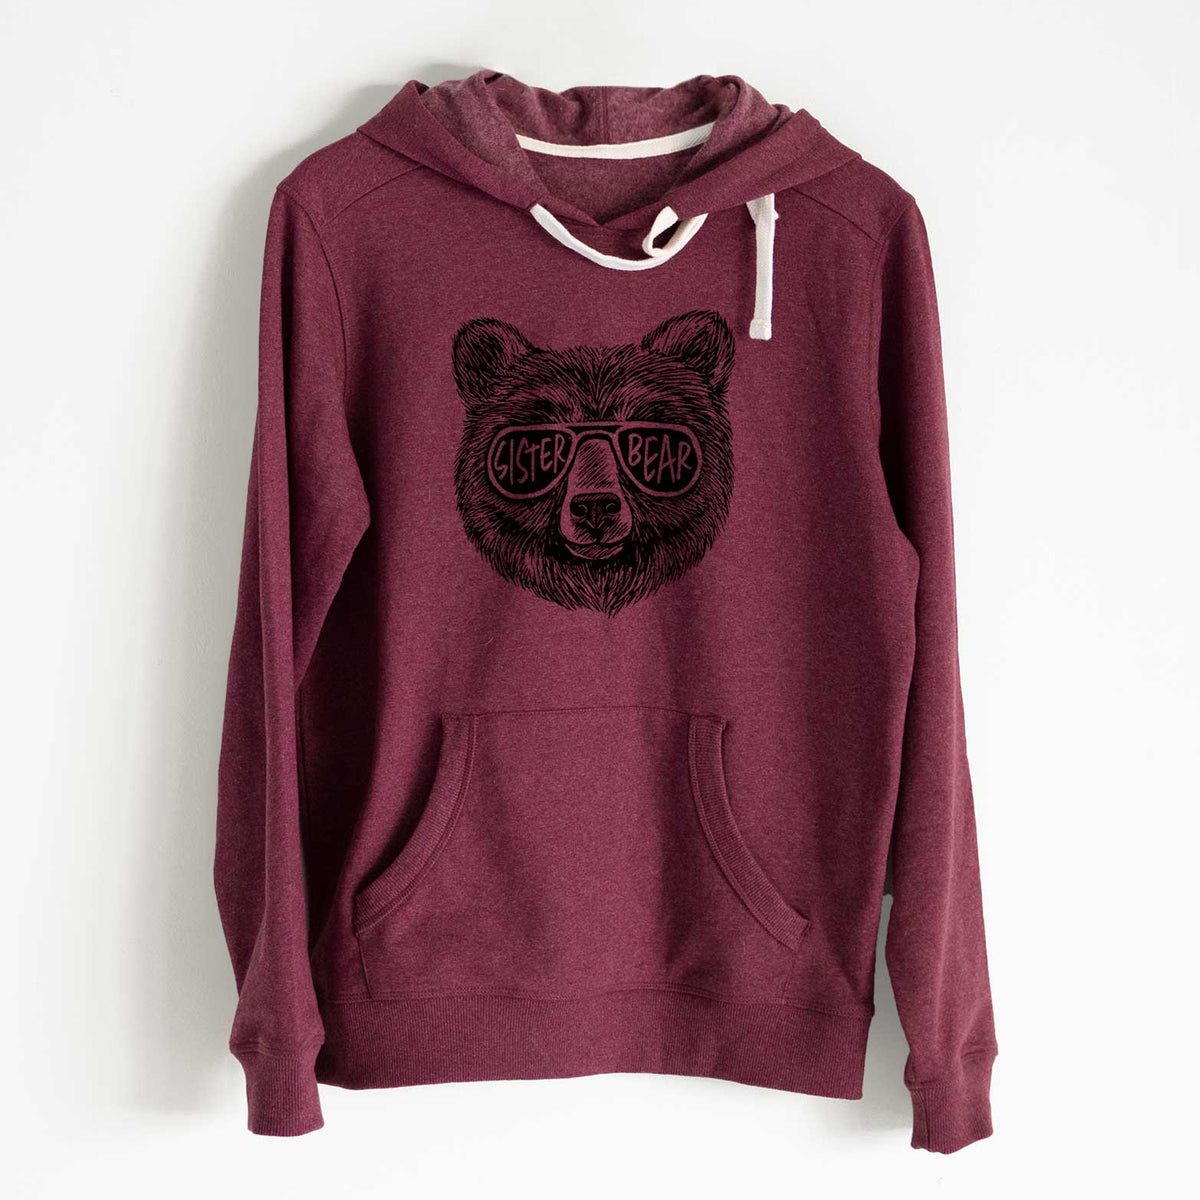 Sister Bear - Unisex Recycled Hoodie - CLOSEOUT - FINAL SALE